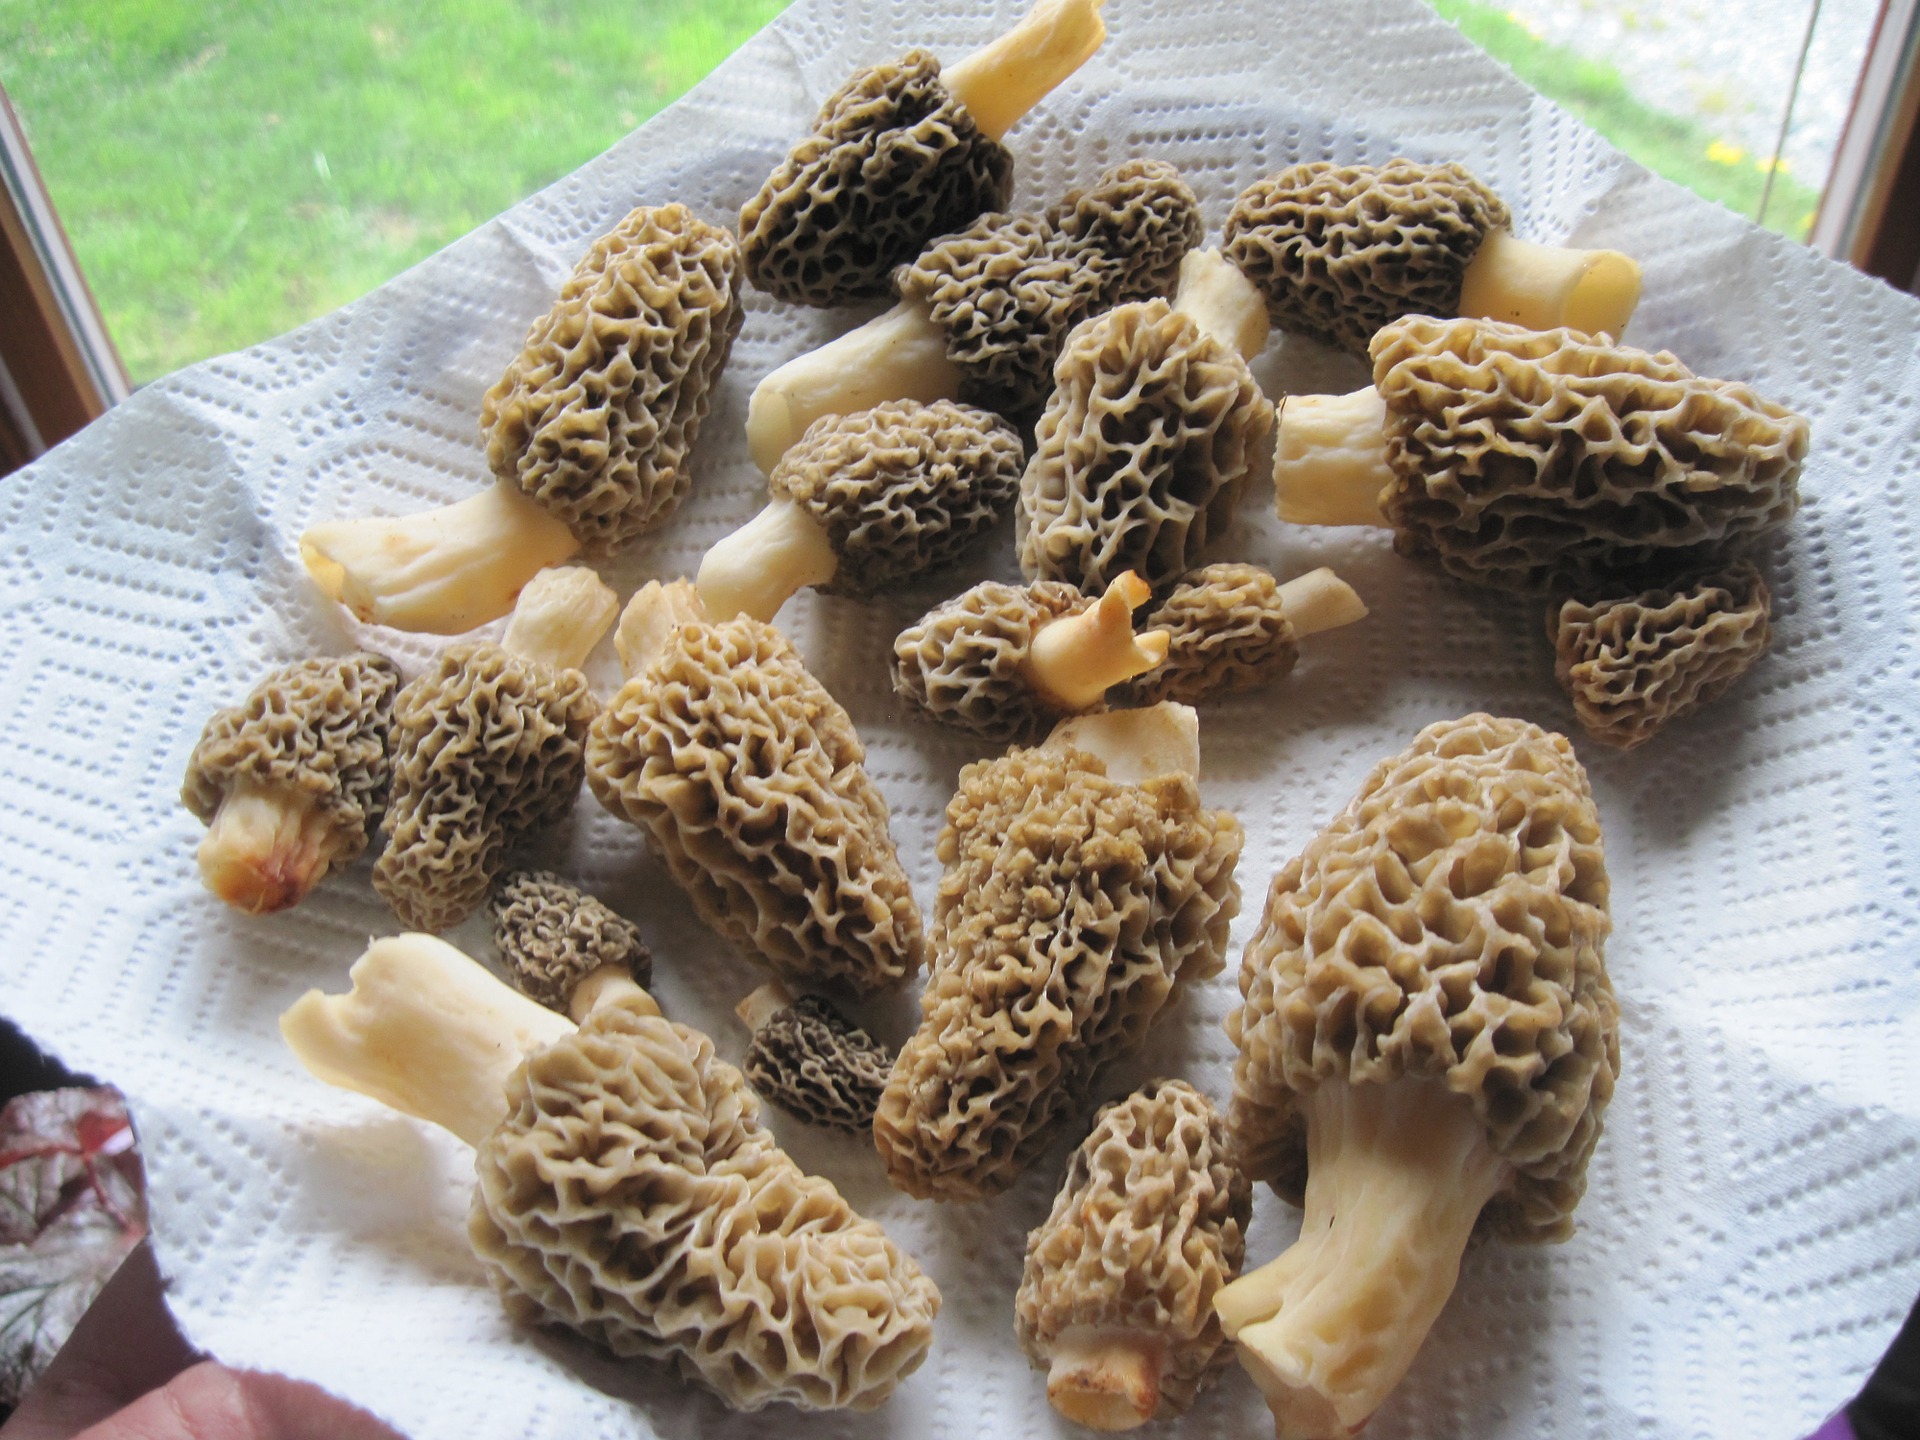 Find a plate full of morels jsut walking around the block.